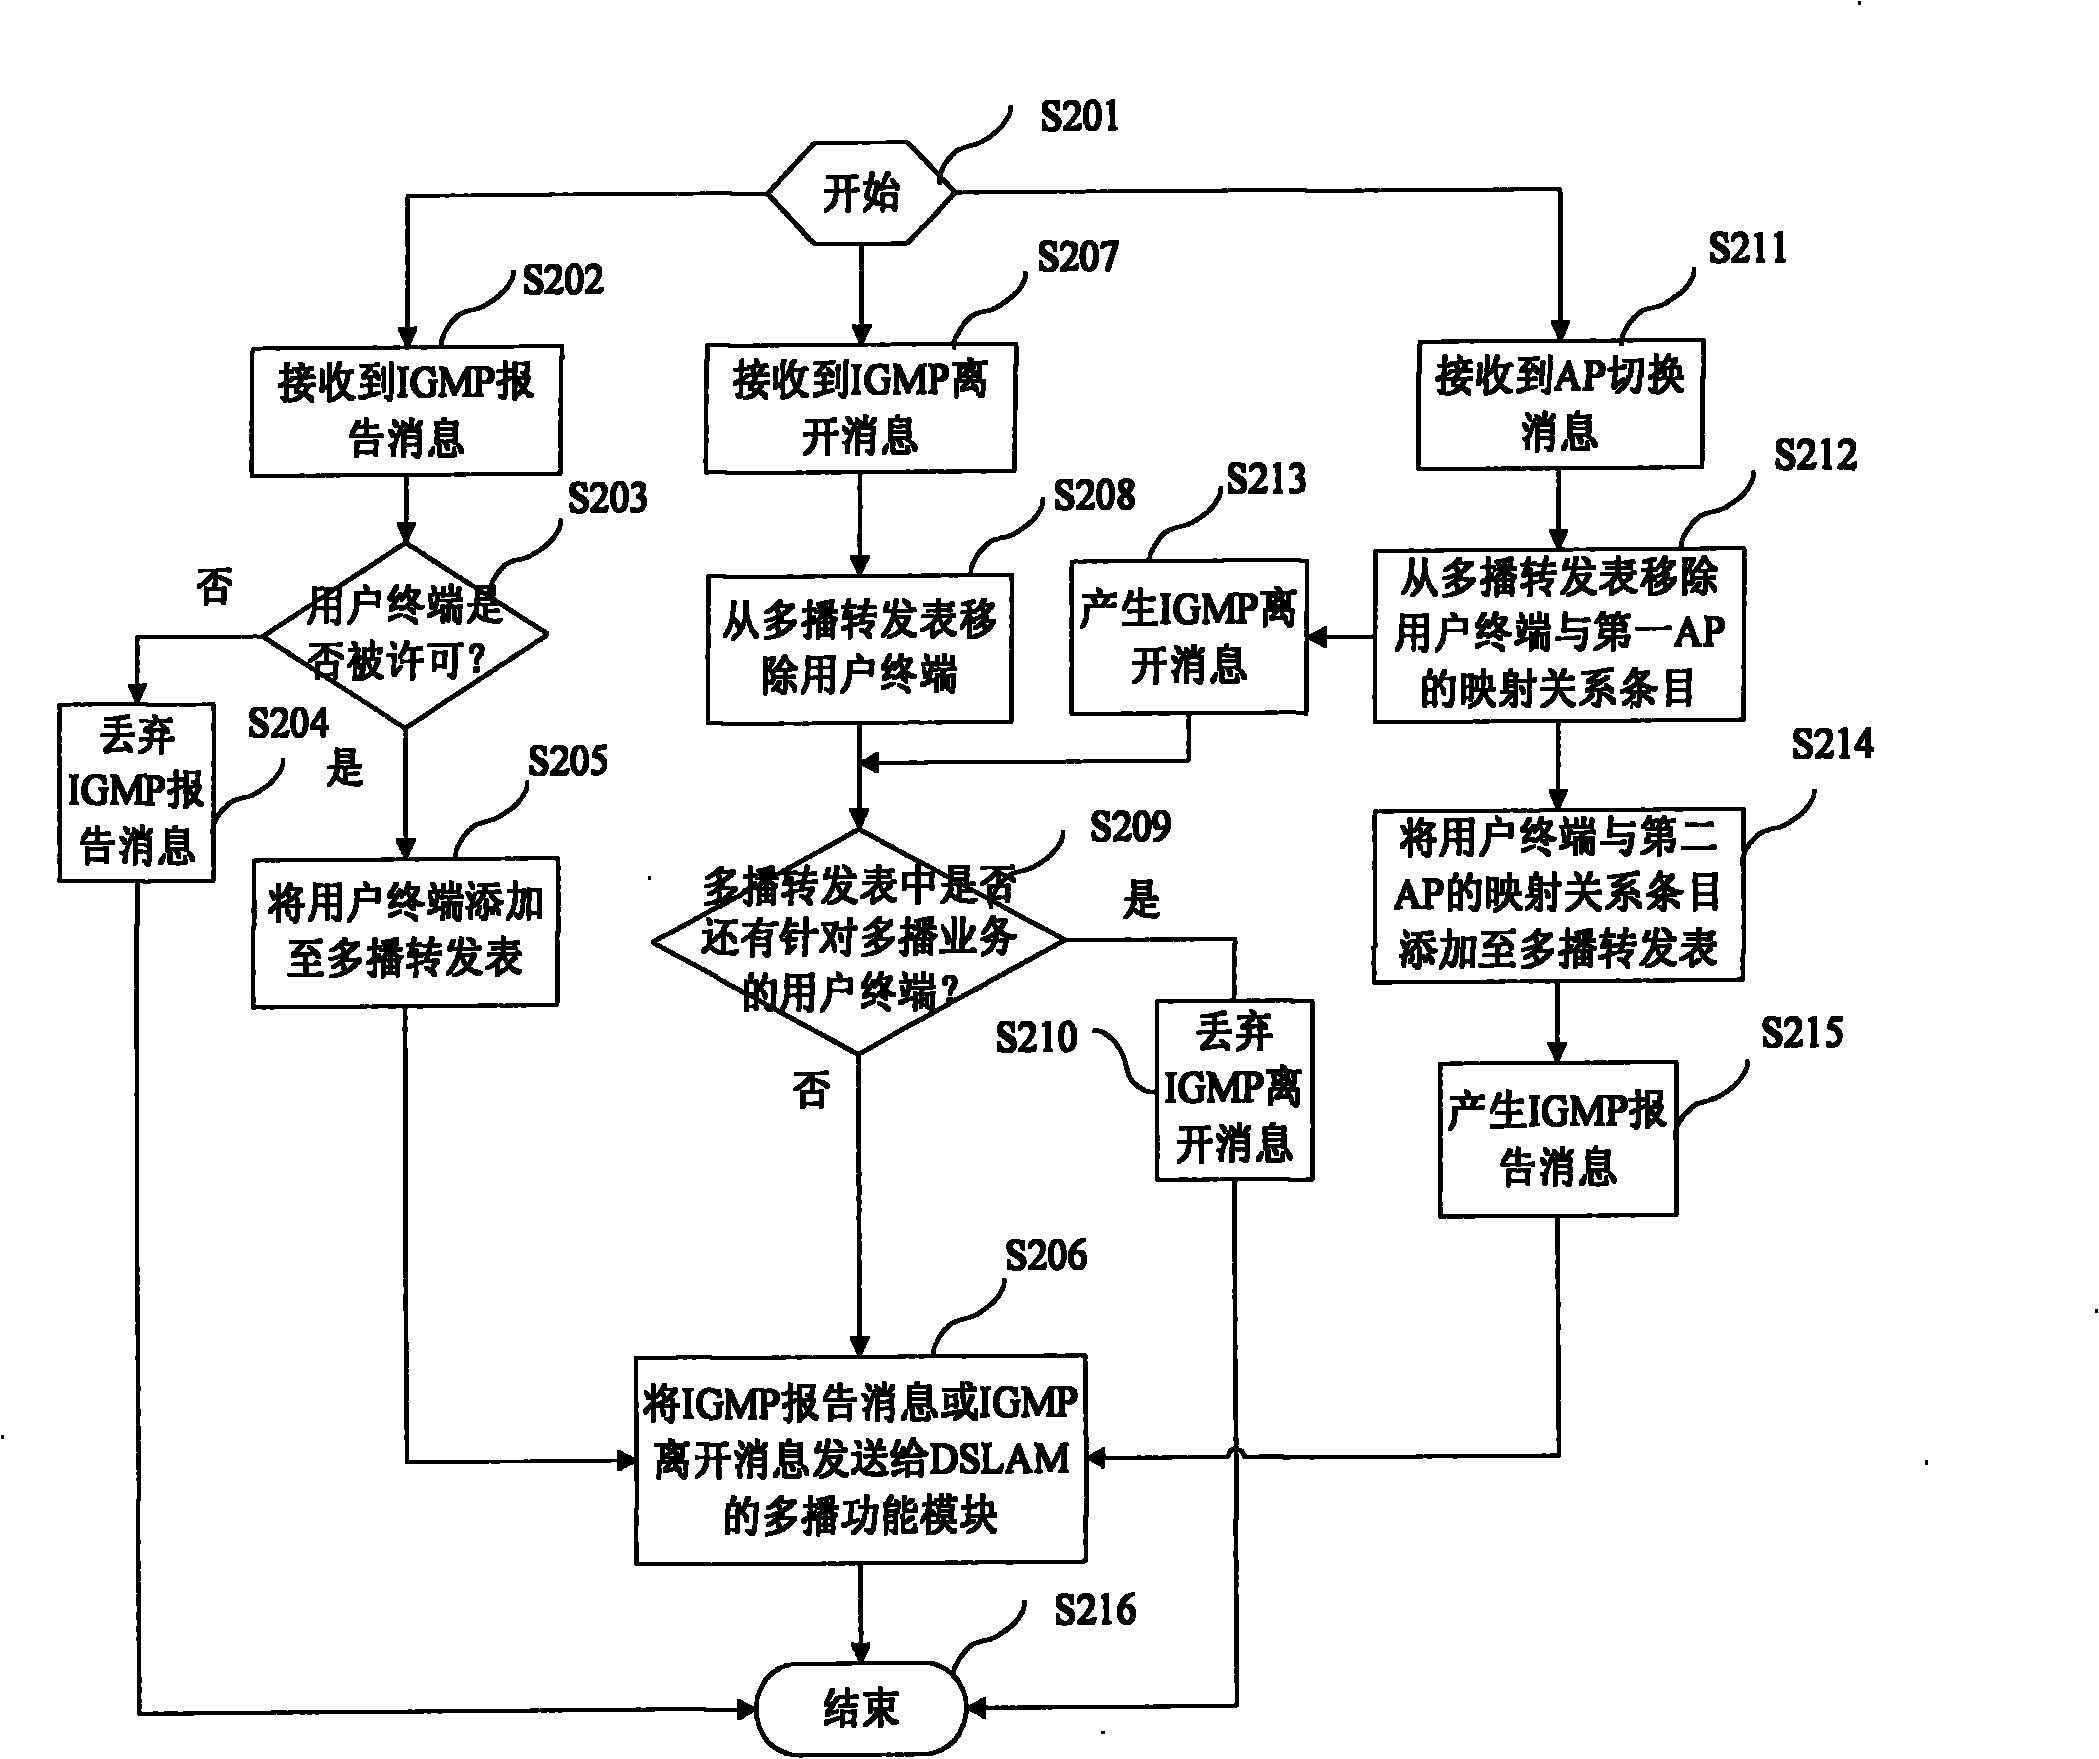 Method and equipment for controlling multicast service in WLAN (Wireless Local Area Network)